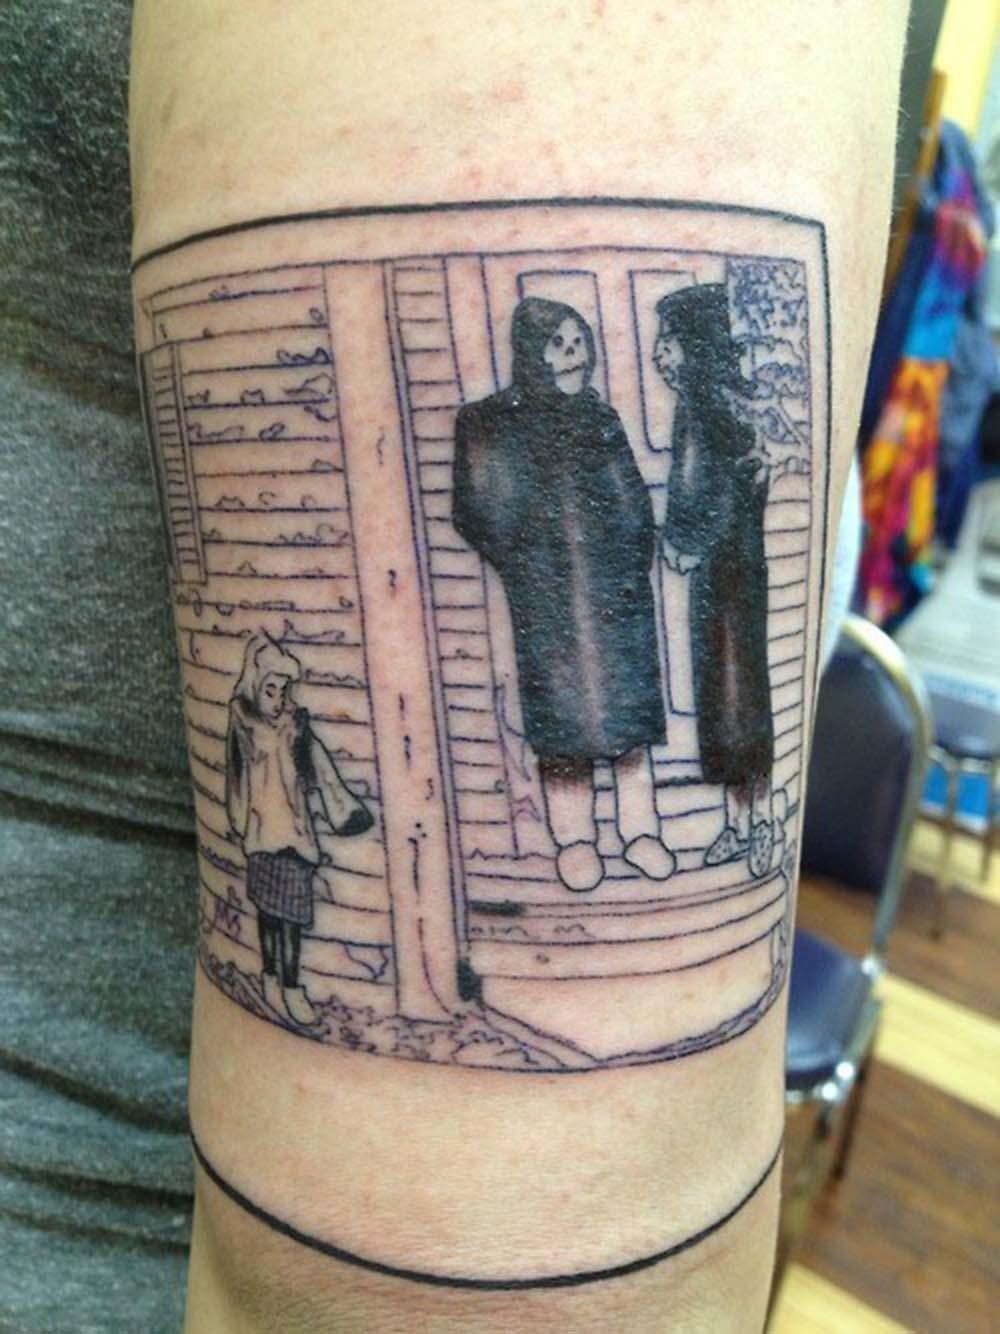 catherine moin recommends the devil and god are raging inside me tattoo pic